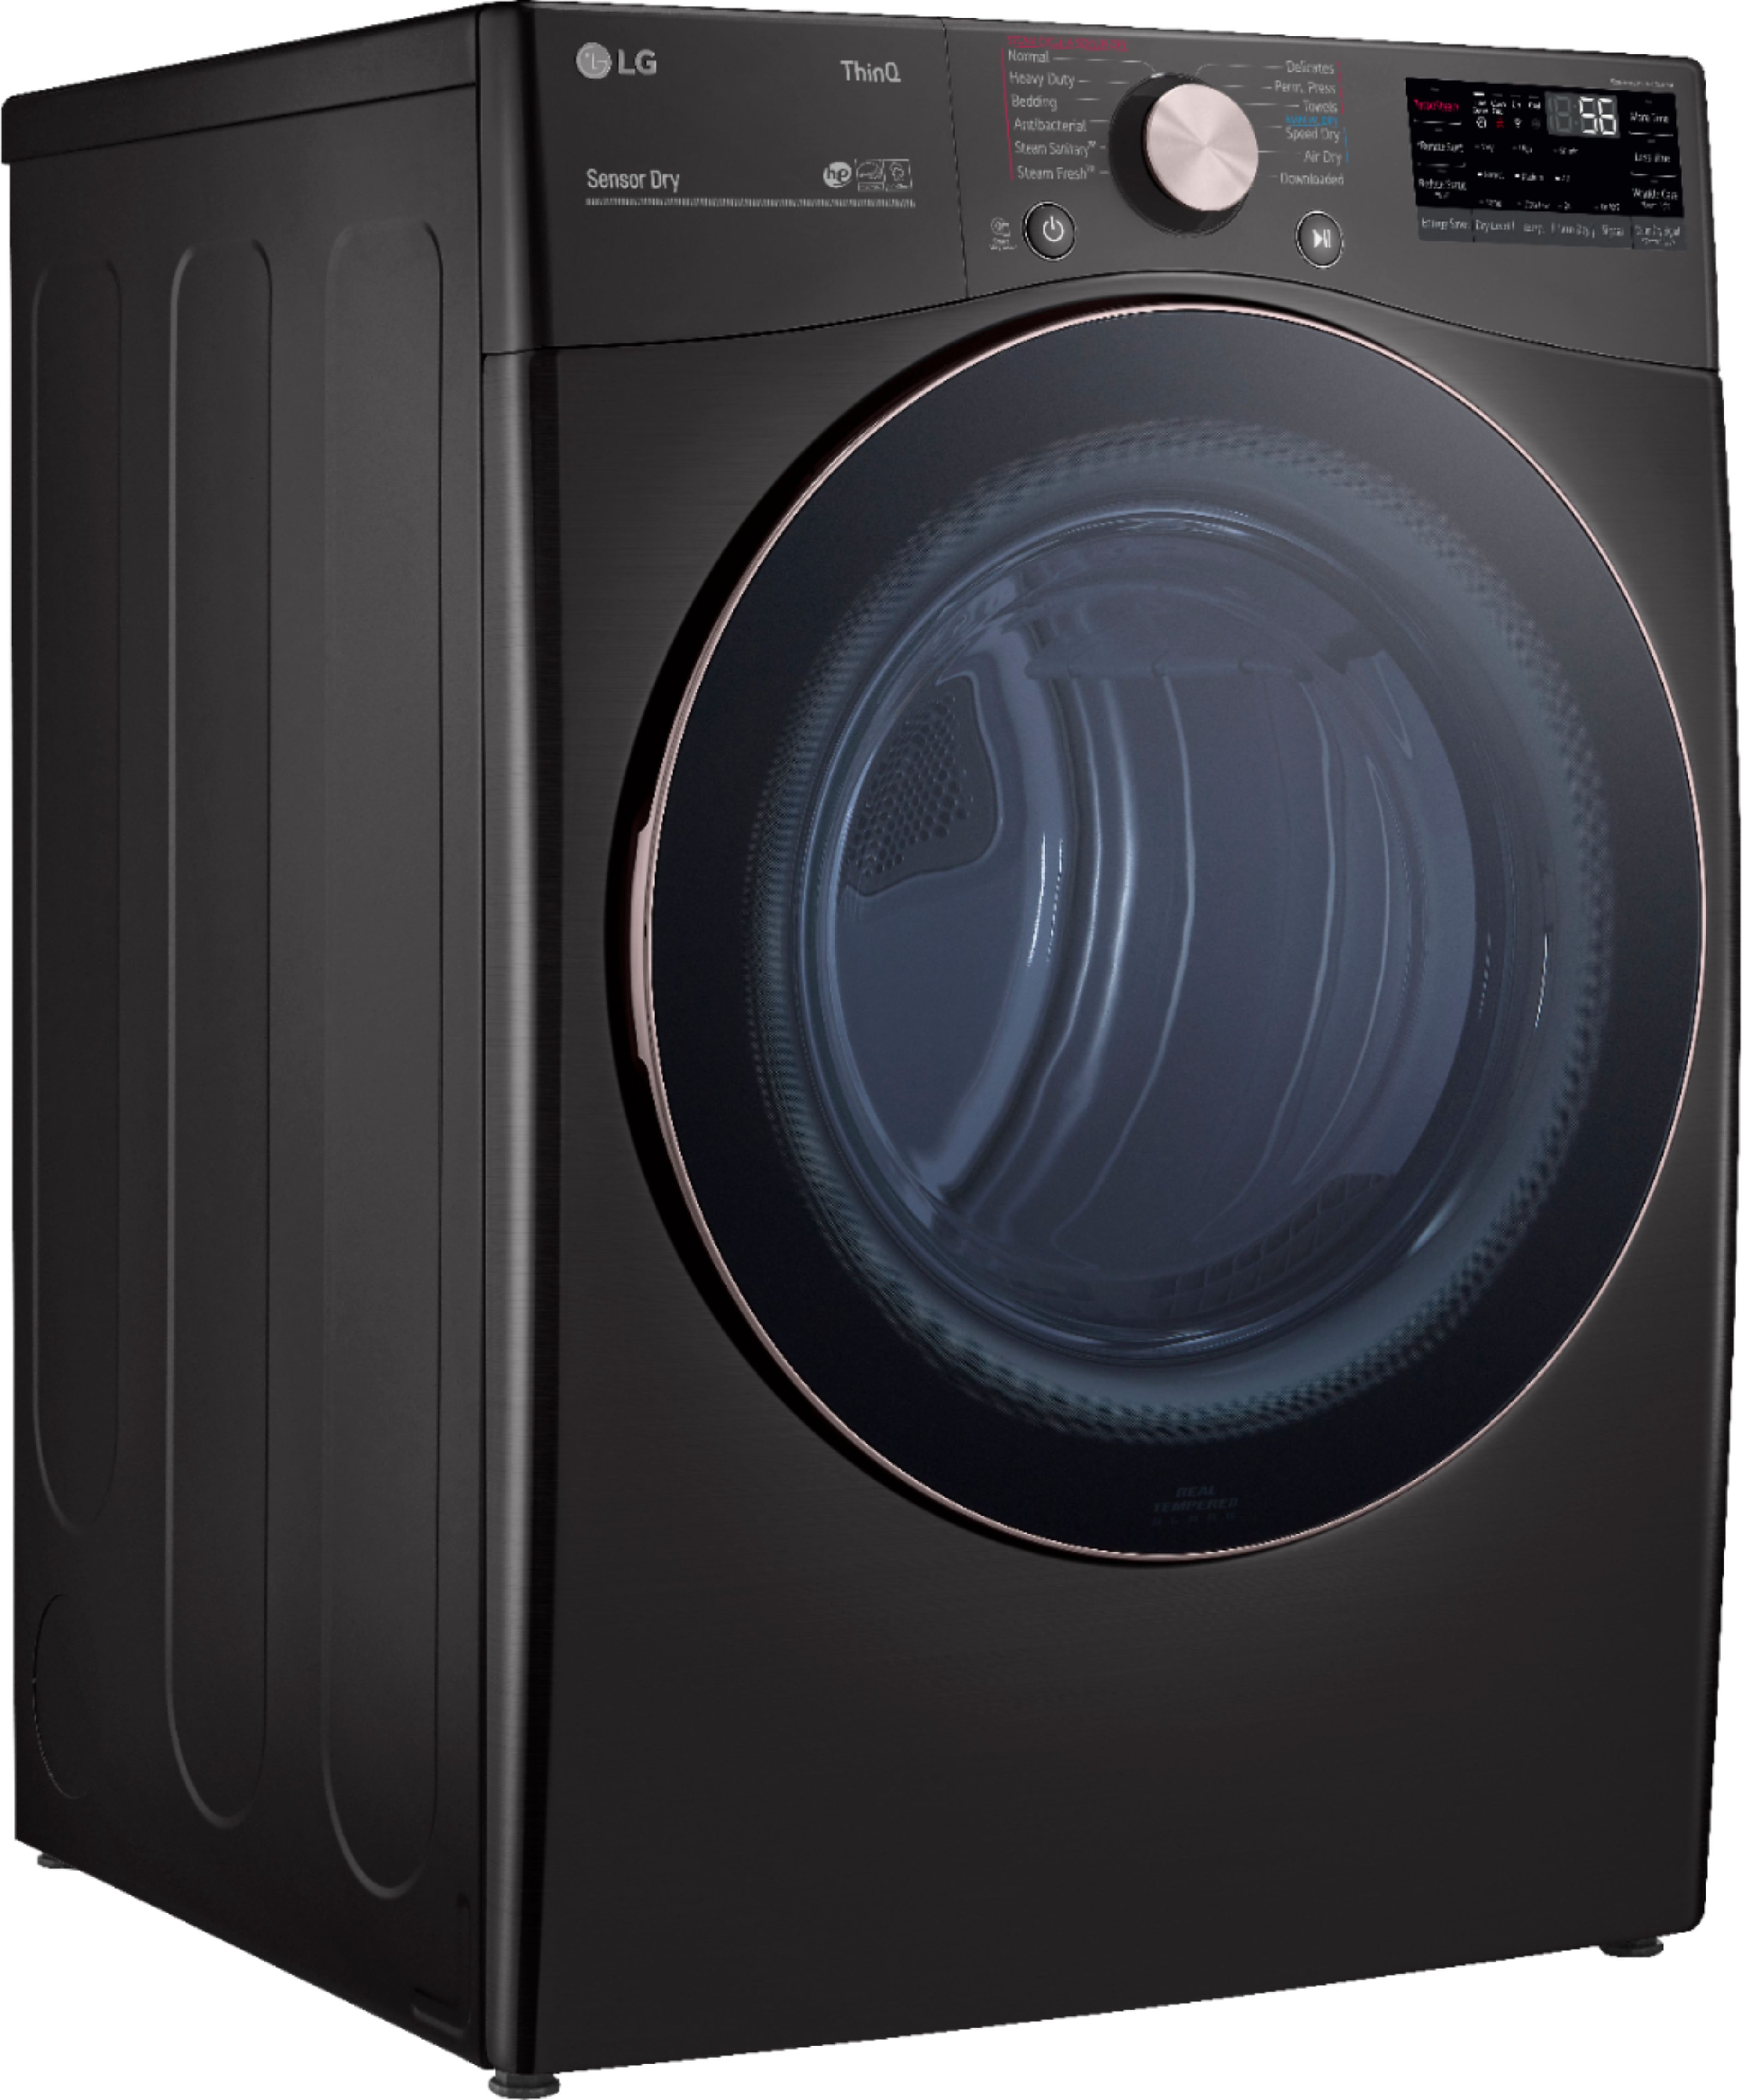 Angle View: LG - 7.4 Cu. Ft. Stackable Smart Electric Dryer with Steam and Built-In Intelligence - Black steel